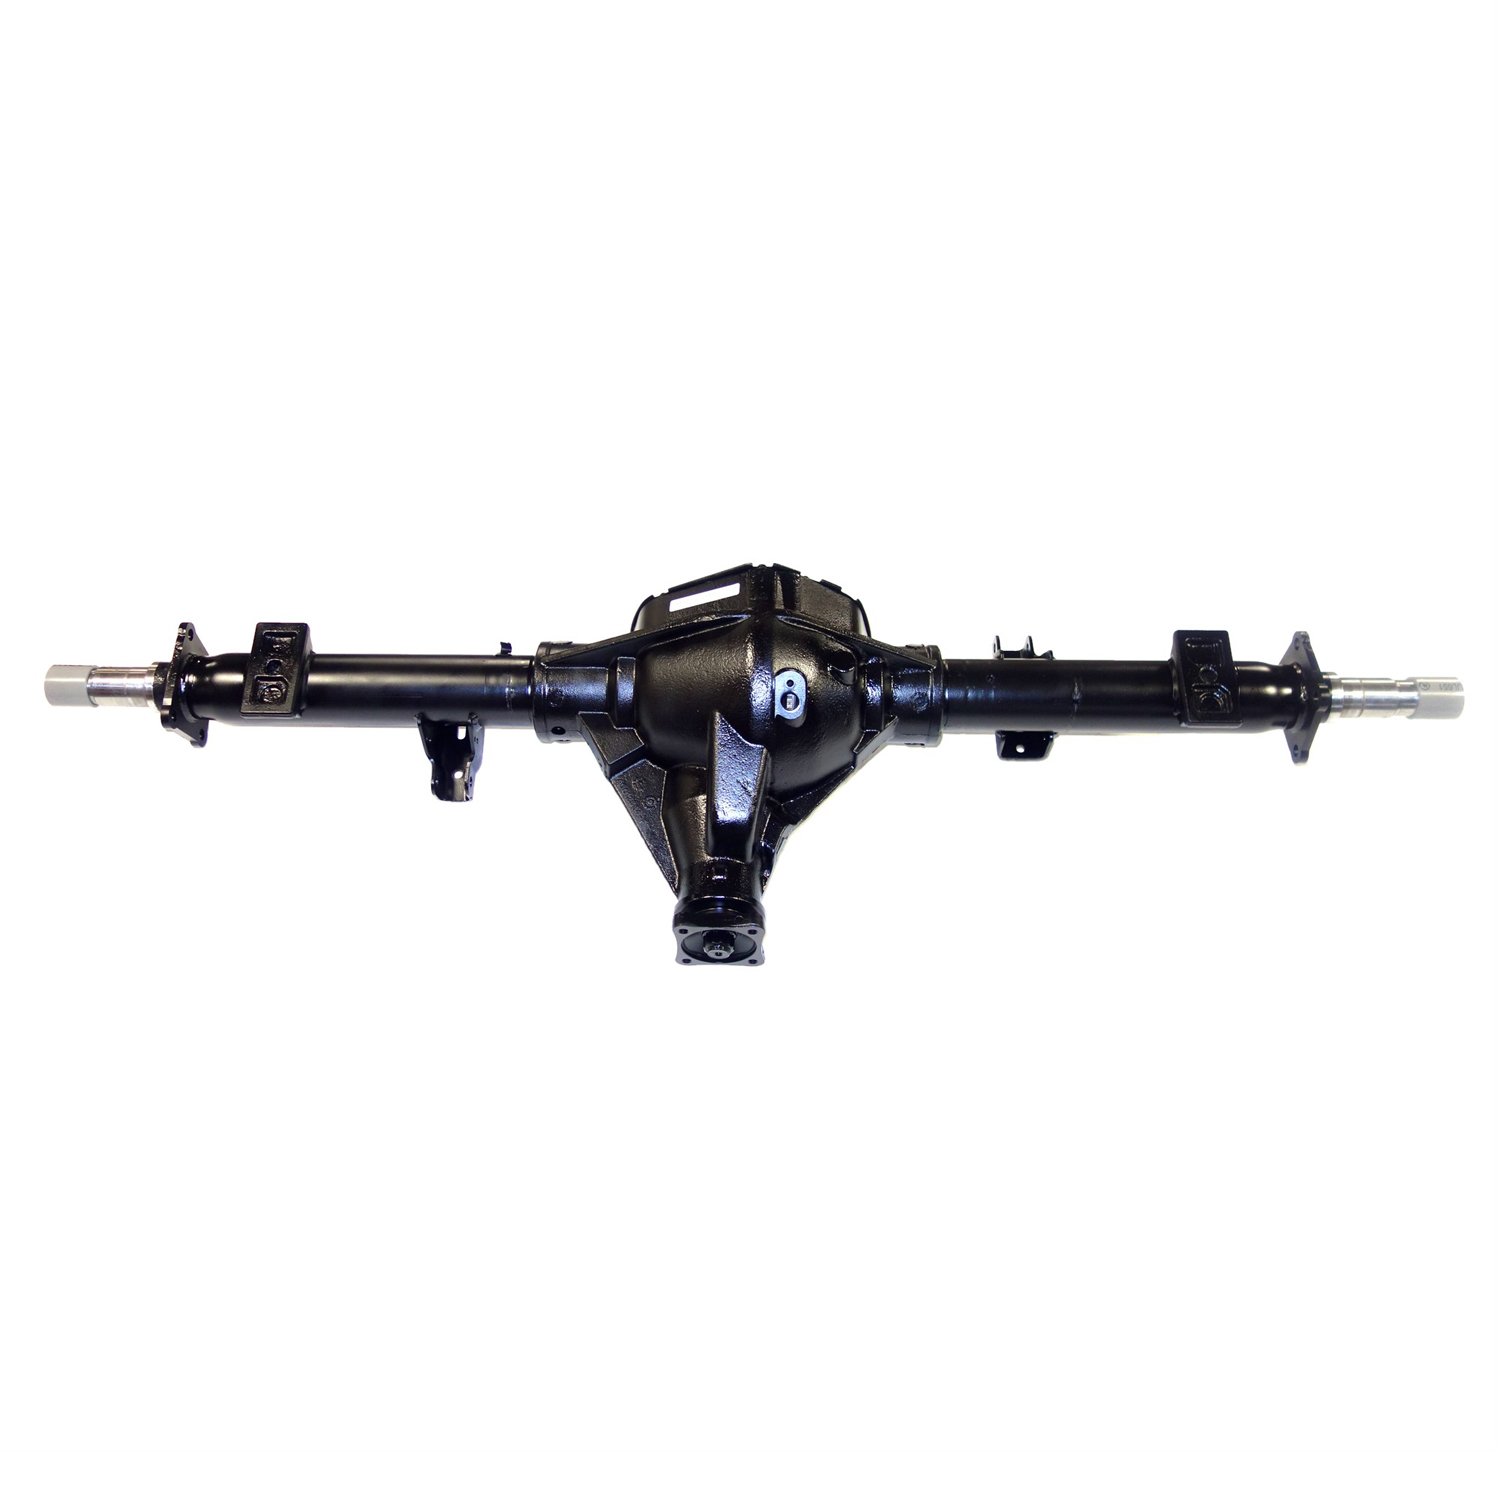 Remanufactured Axle Assy for Chy 11.5" 2009 Ram 2500 & 3500 3.42 , SRW, 4x4, Posi LSD